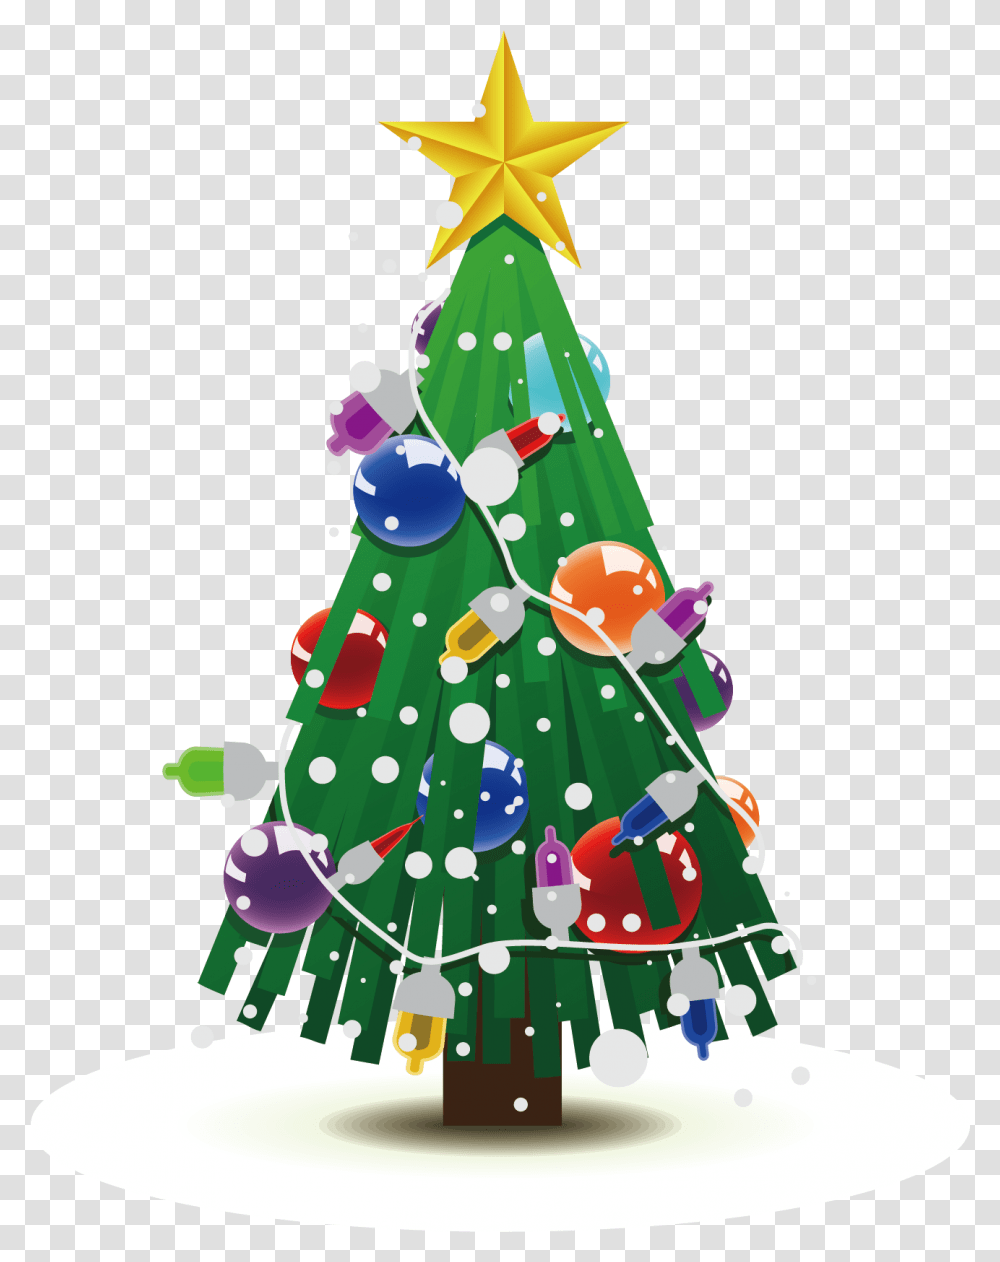 Christmas Tree Outline Christmas Tree Gif Background, Plant, Ornament, Star Symbol Transparent Png